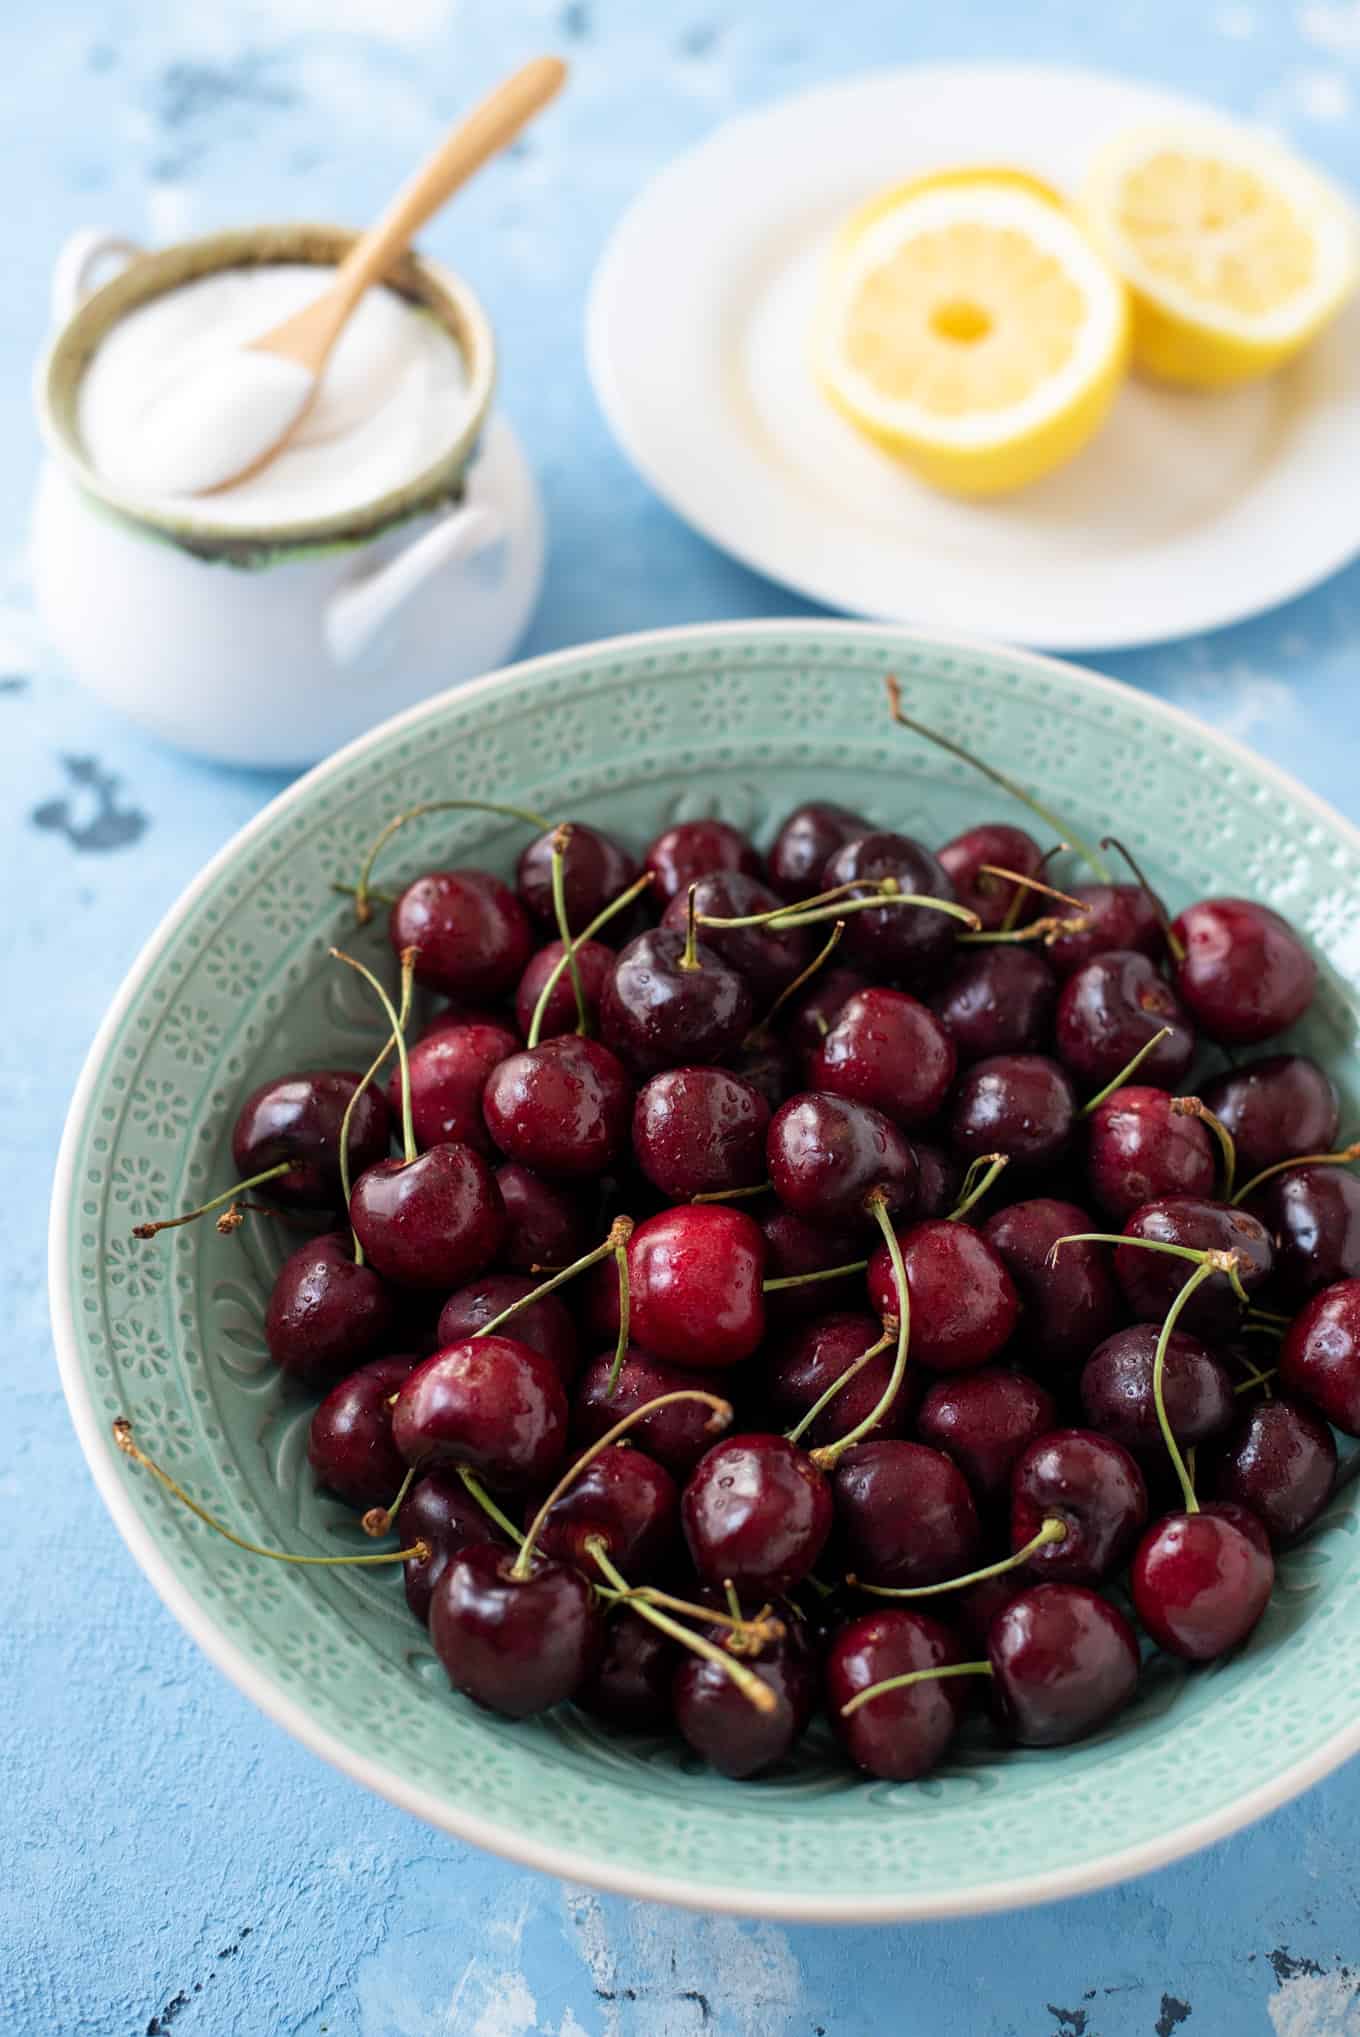 A bowl of cherries on a table with sugar and lemons in the background.